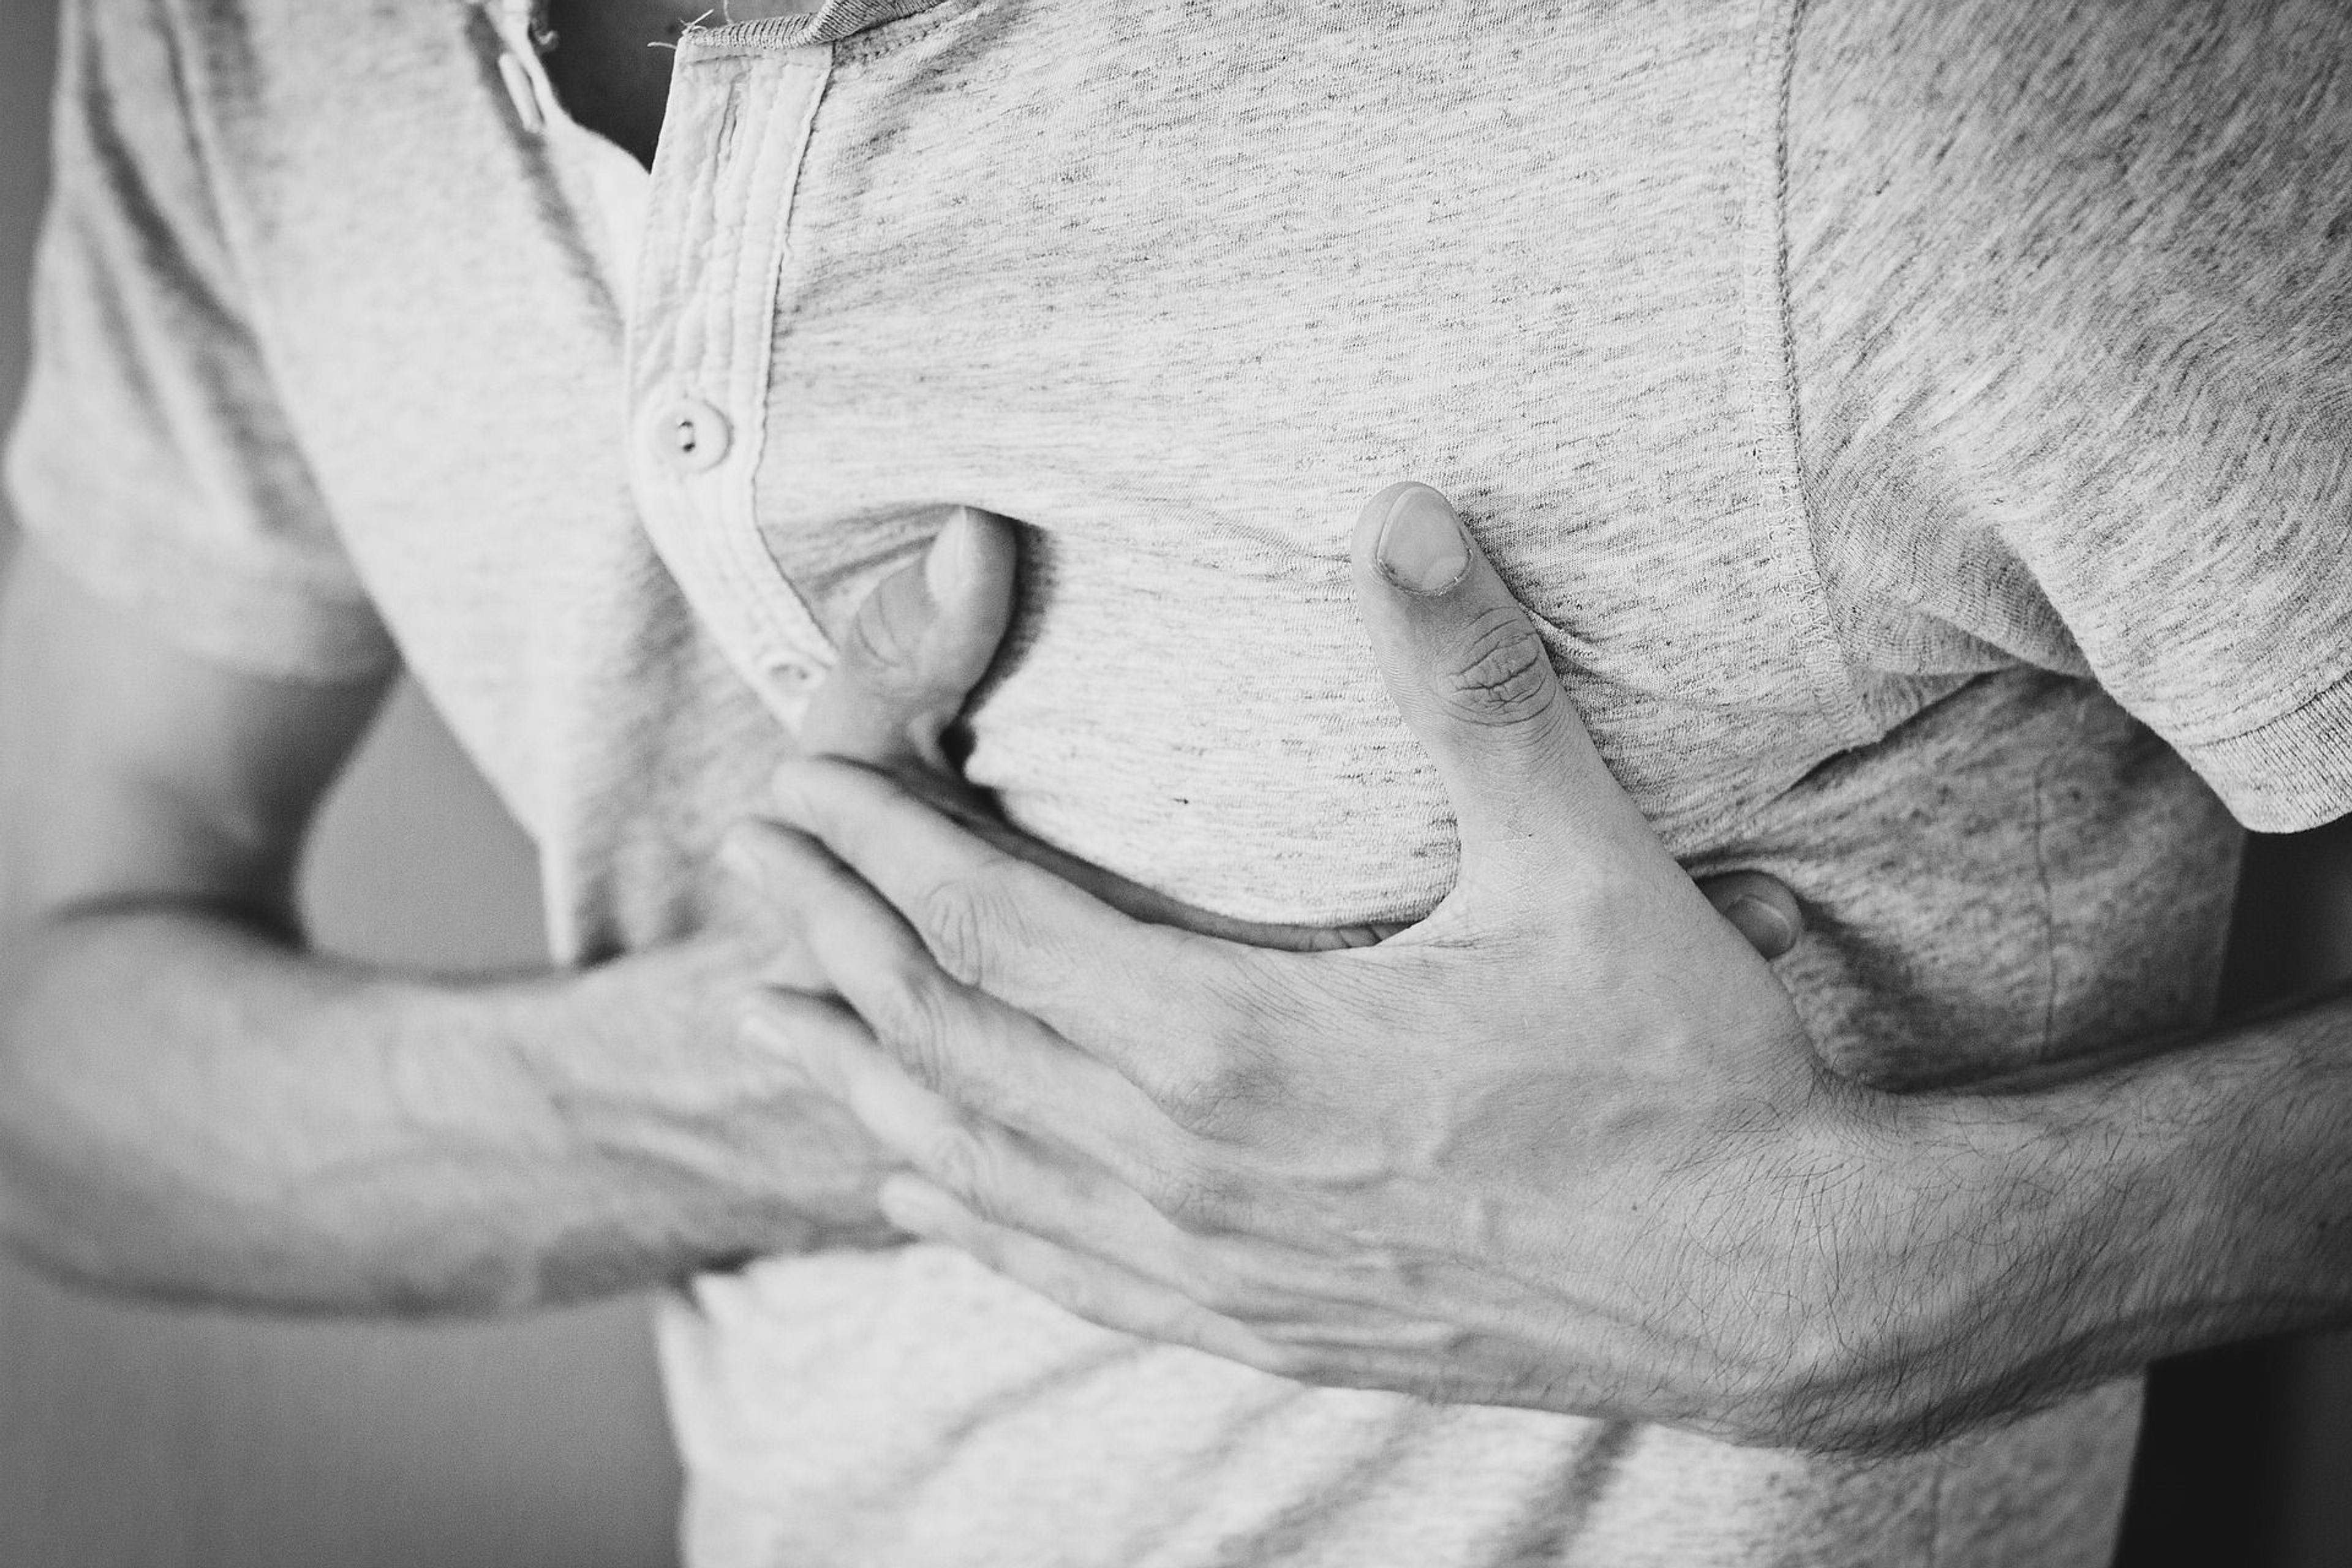 Man holding his chest in pain